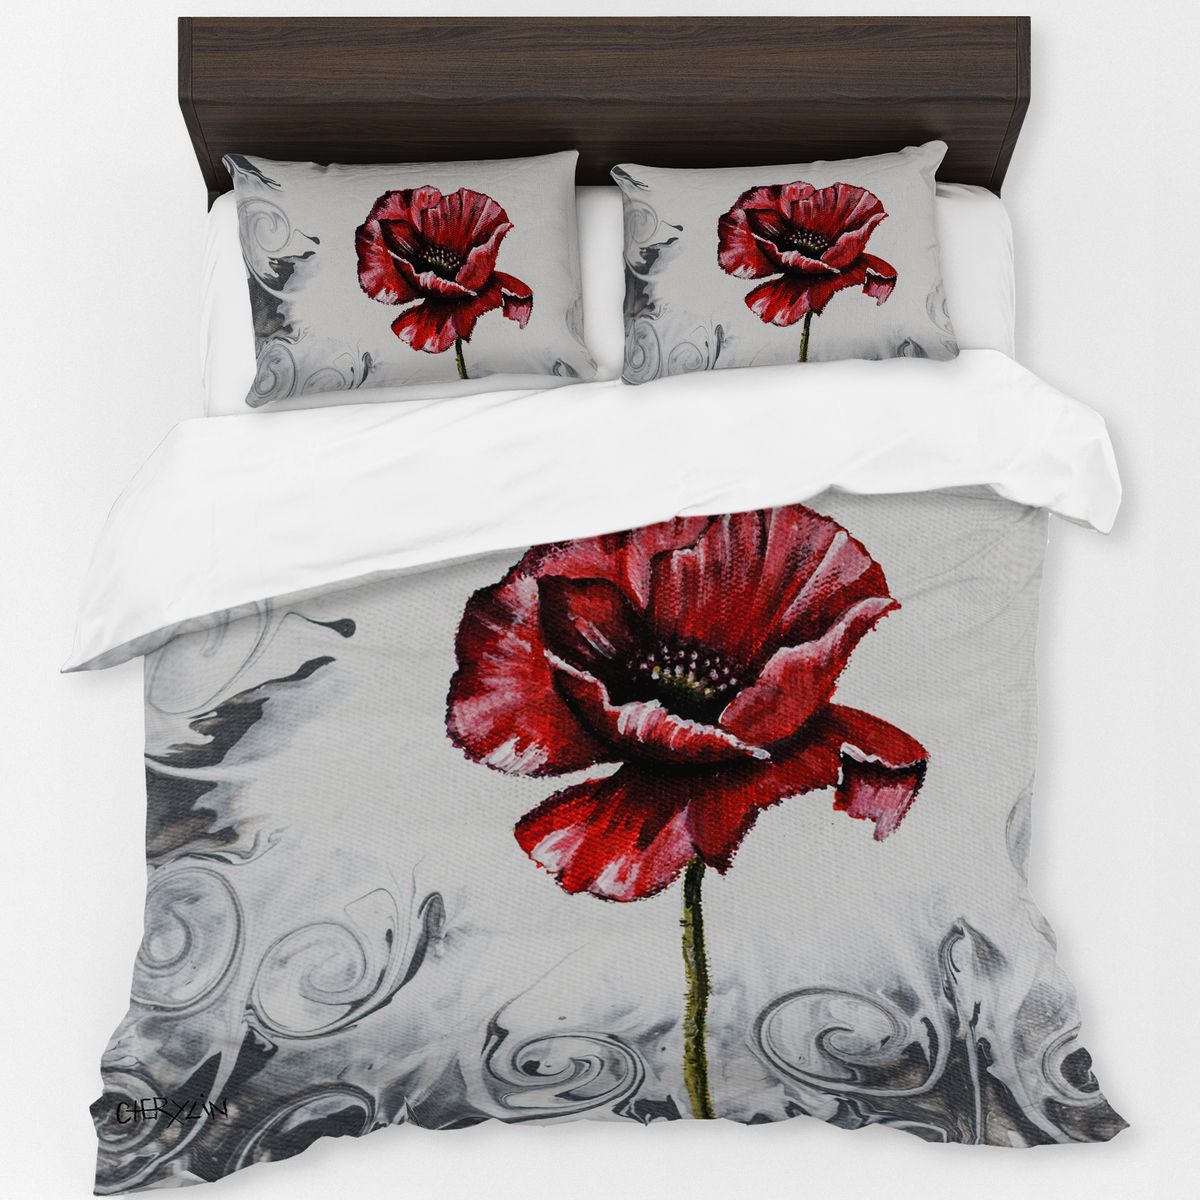 Pouring Poppies Twirls By Cherylin Louw Duvet Cover Set